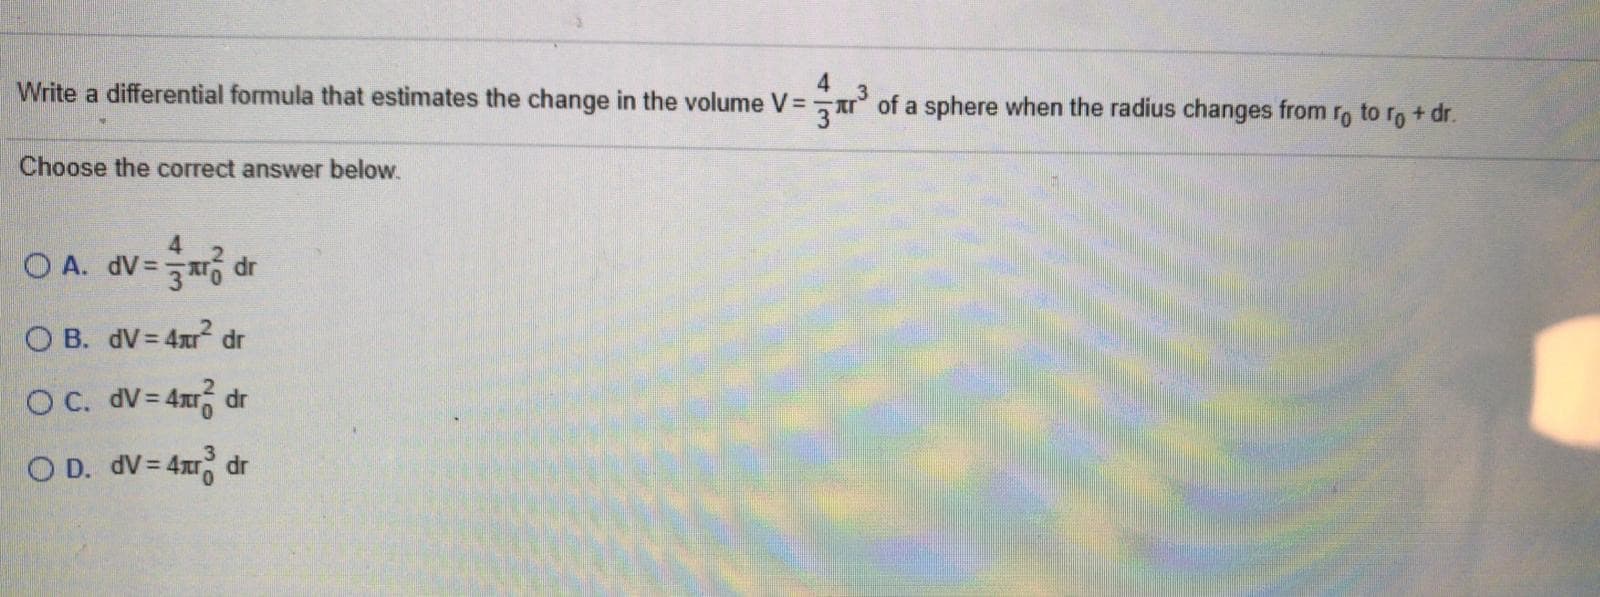 Write a differential formula that estimates the change in the volume V =
of a sphere when the radius changes from ro to ro+ dr.
Choose the correct answer below.
4.
O A. dV= dr
O B. dV= 4xr dr
OC. dv= 4x dr
O D. dV = 4x dr
